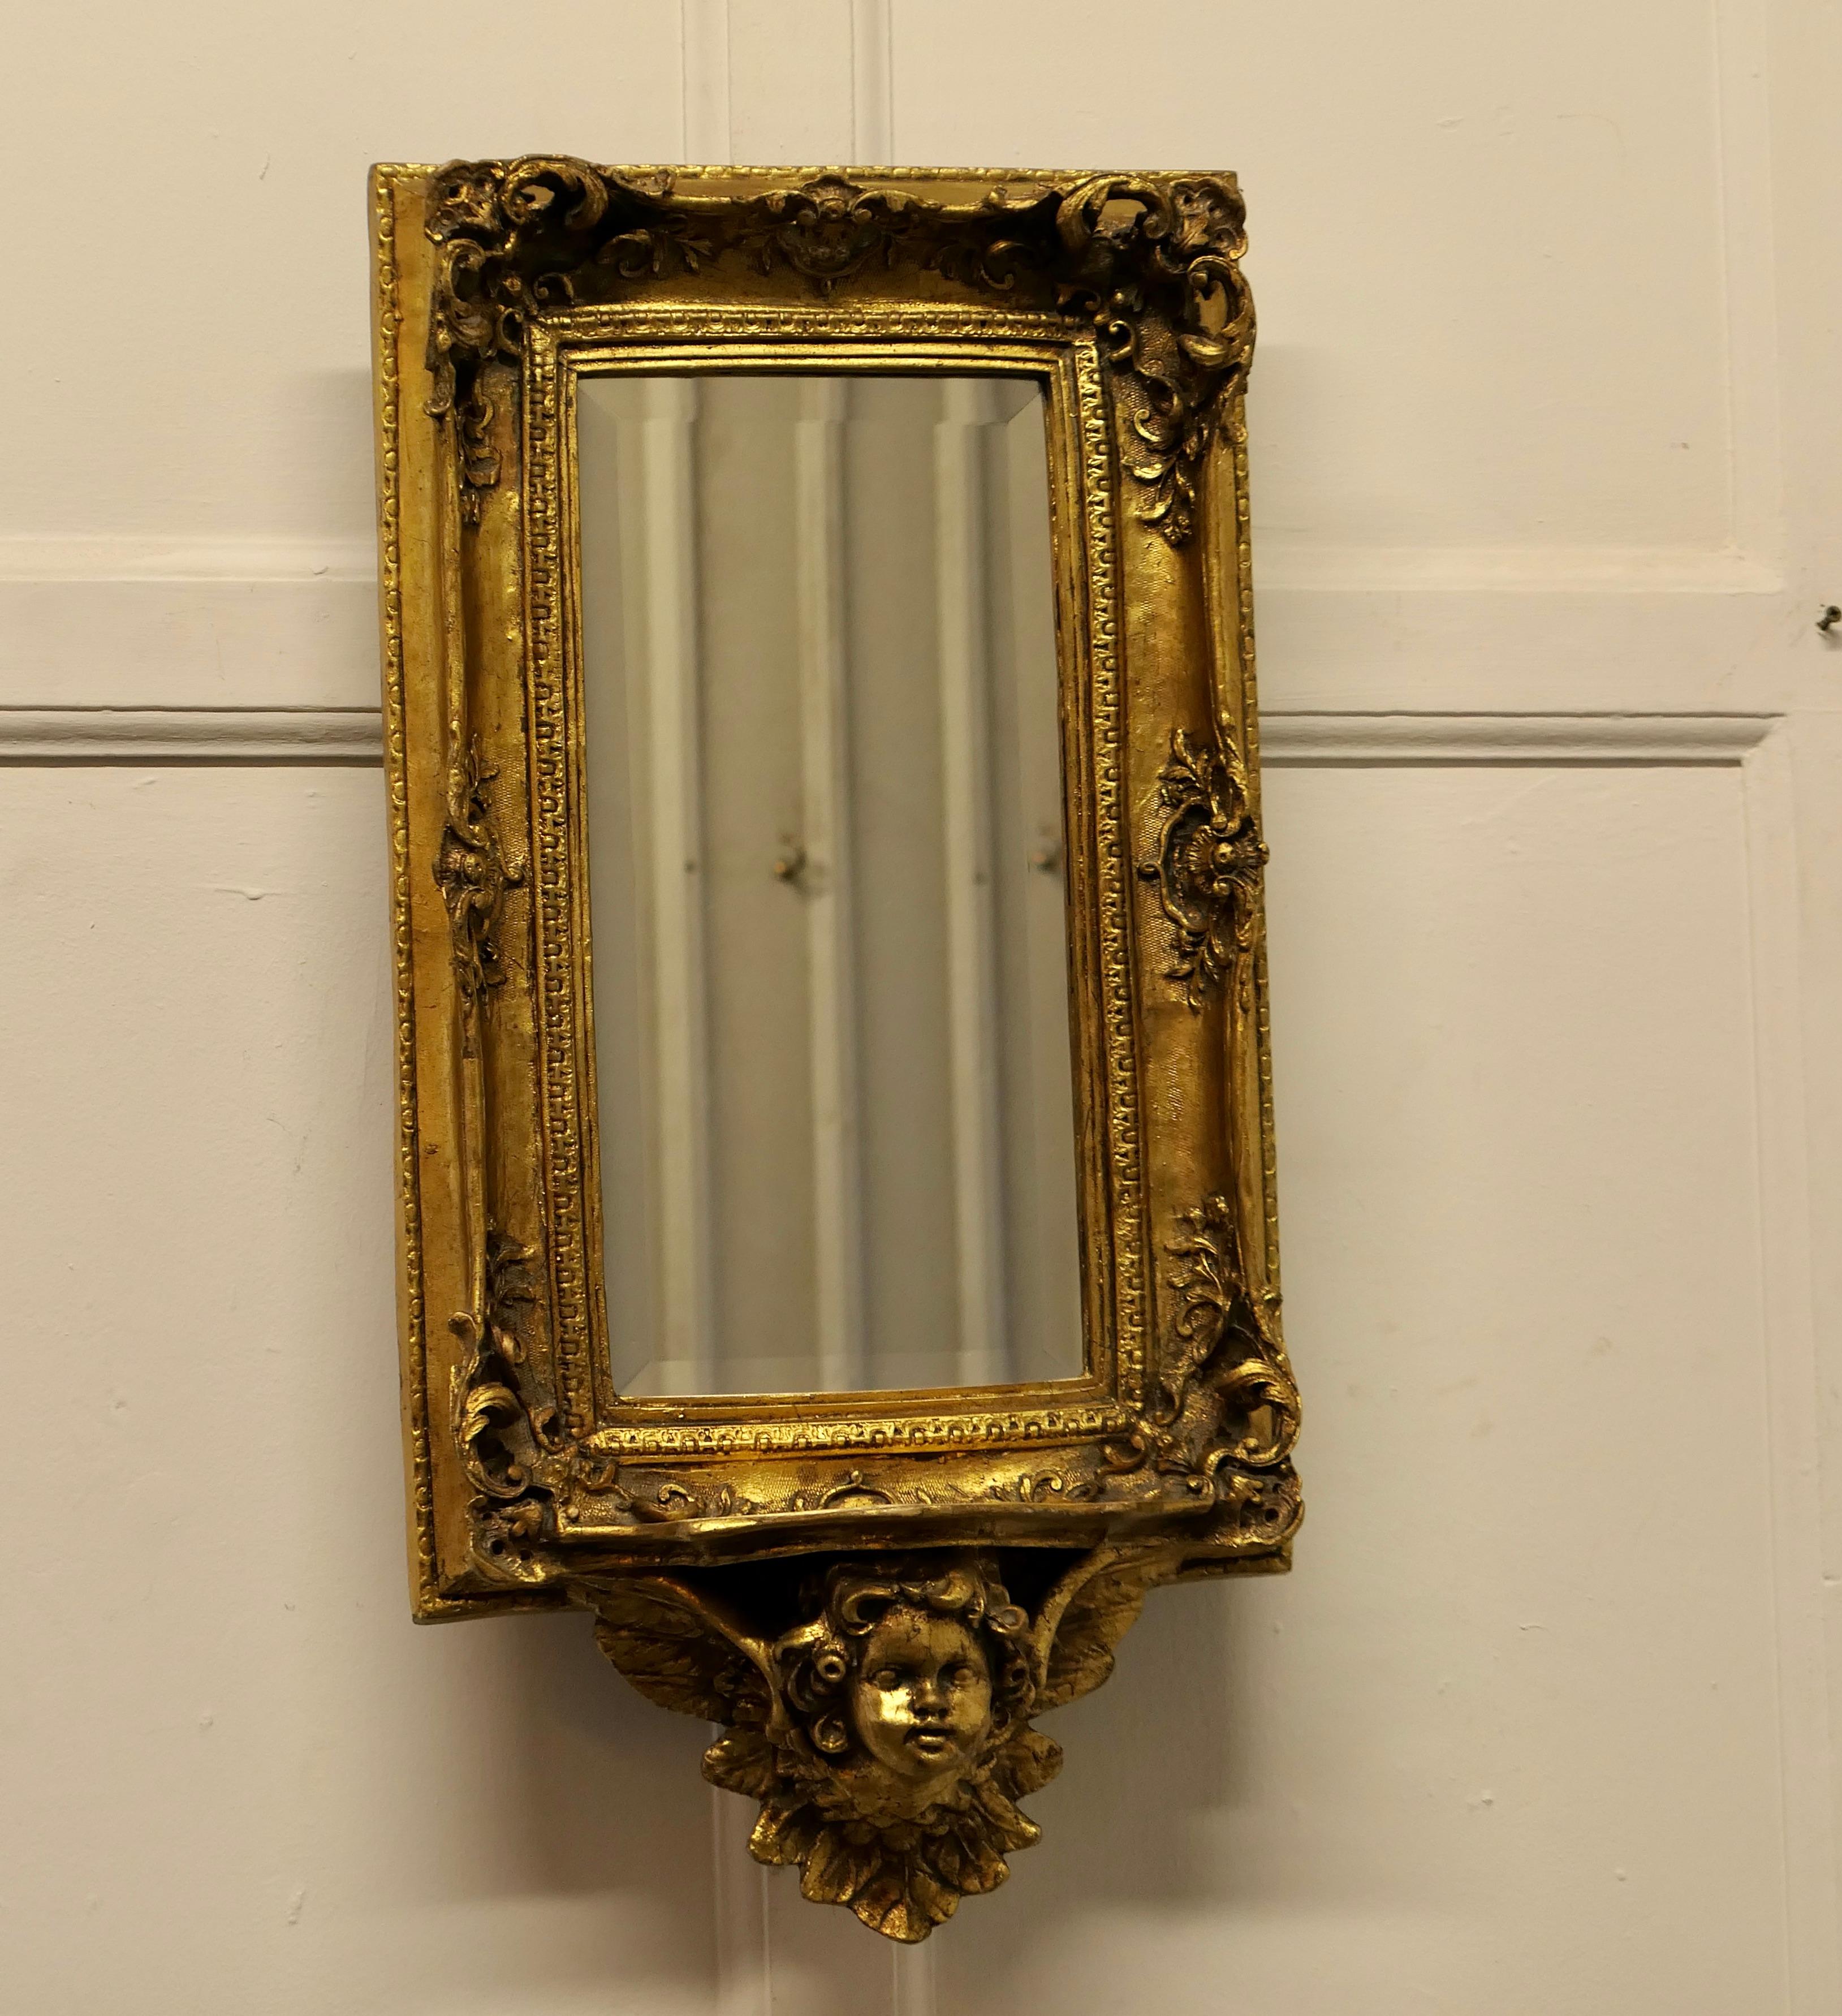 Rococo Style gilt wall mirror with Putti and Shelf Bracket.

The mirror has an exquisite gilt Frame in the Rococo Style, it is rectangular in shape and has the face of a putti angel at the bottom supporting a small shelf 
In good age darkened